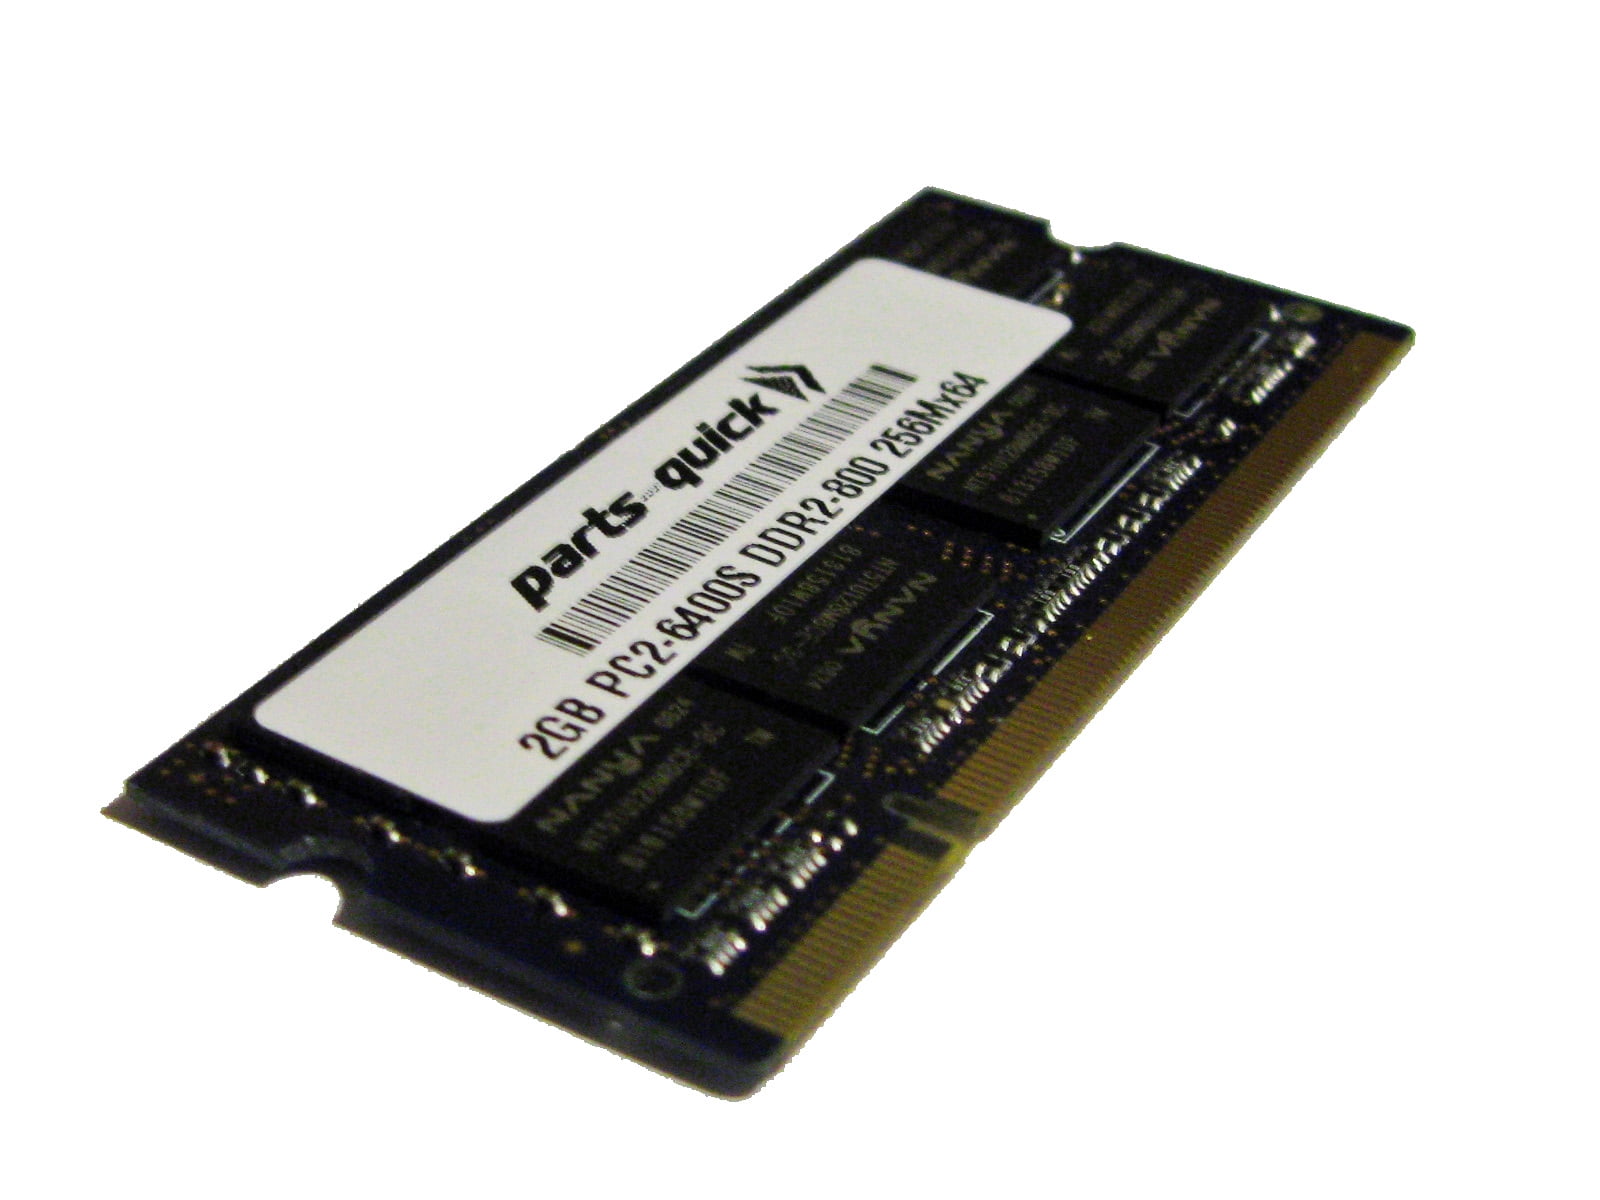 parts-quick 4GB Memory for Sony VAIO VGN-FW25G DDR2 PC2-6400 800MHz SODIMM Compatible RAM